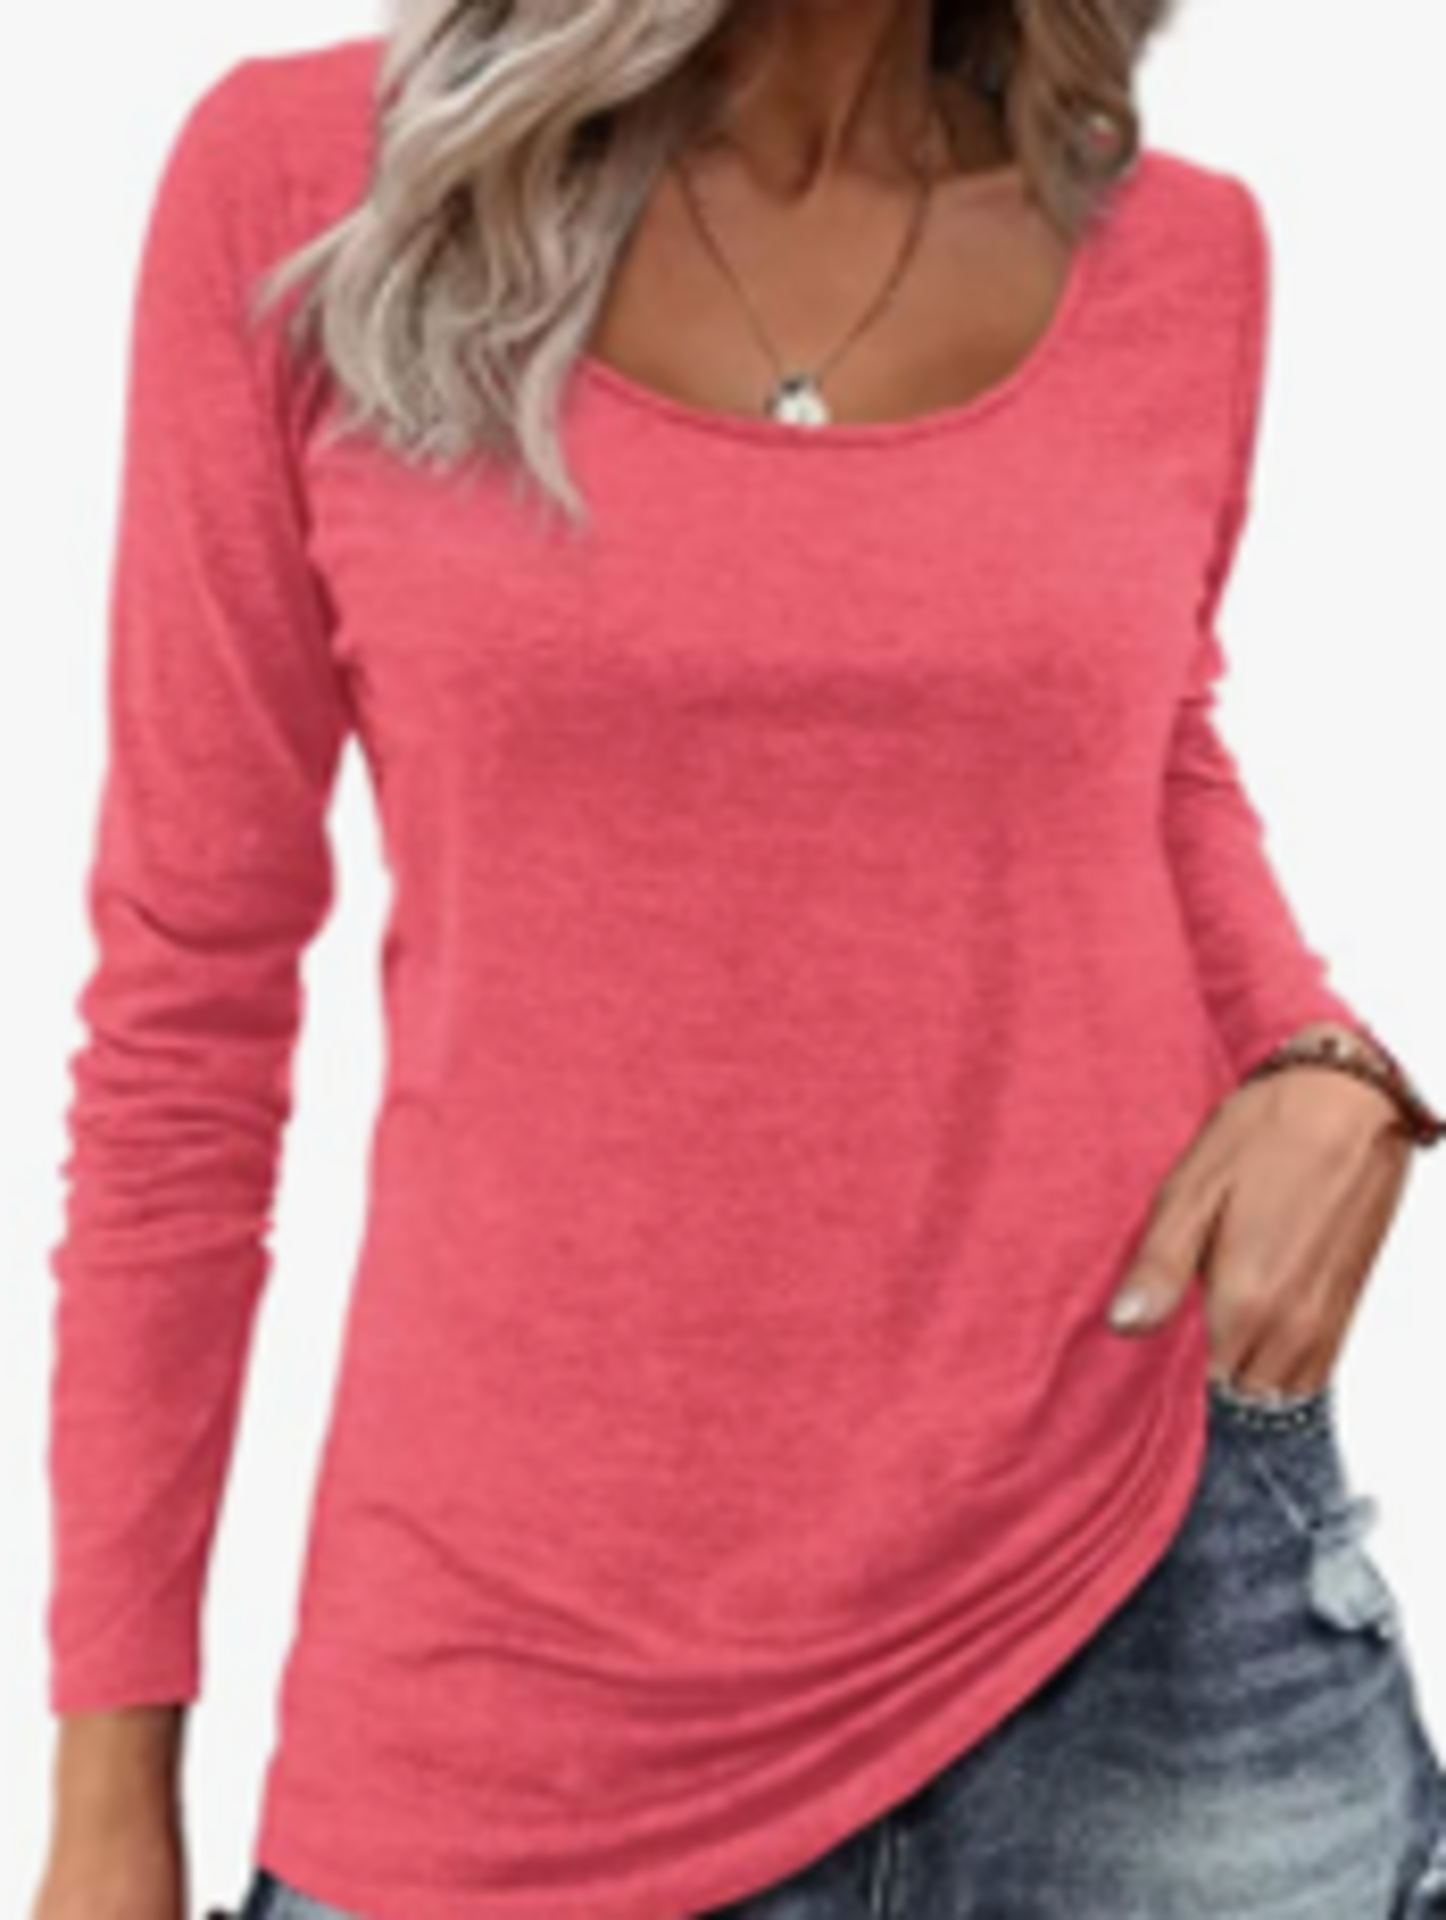 60 X BRAND NEW PIECES OF ASSORTED LADIES CLOTHING IN VARIOUS STYLES AND SIZES RRP £17-35 PER PIECE - Image 6 of 21